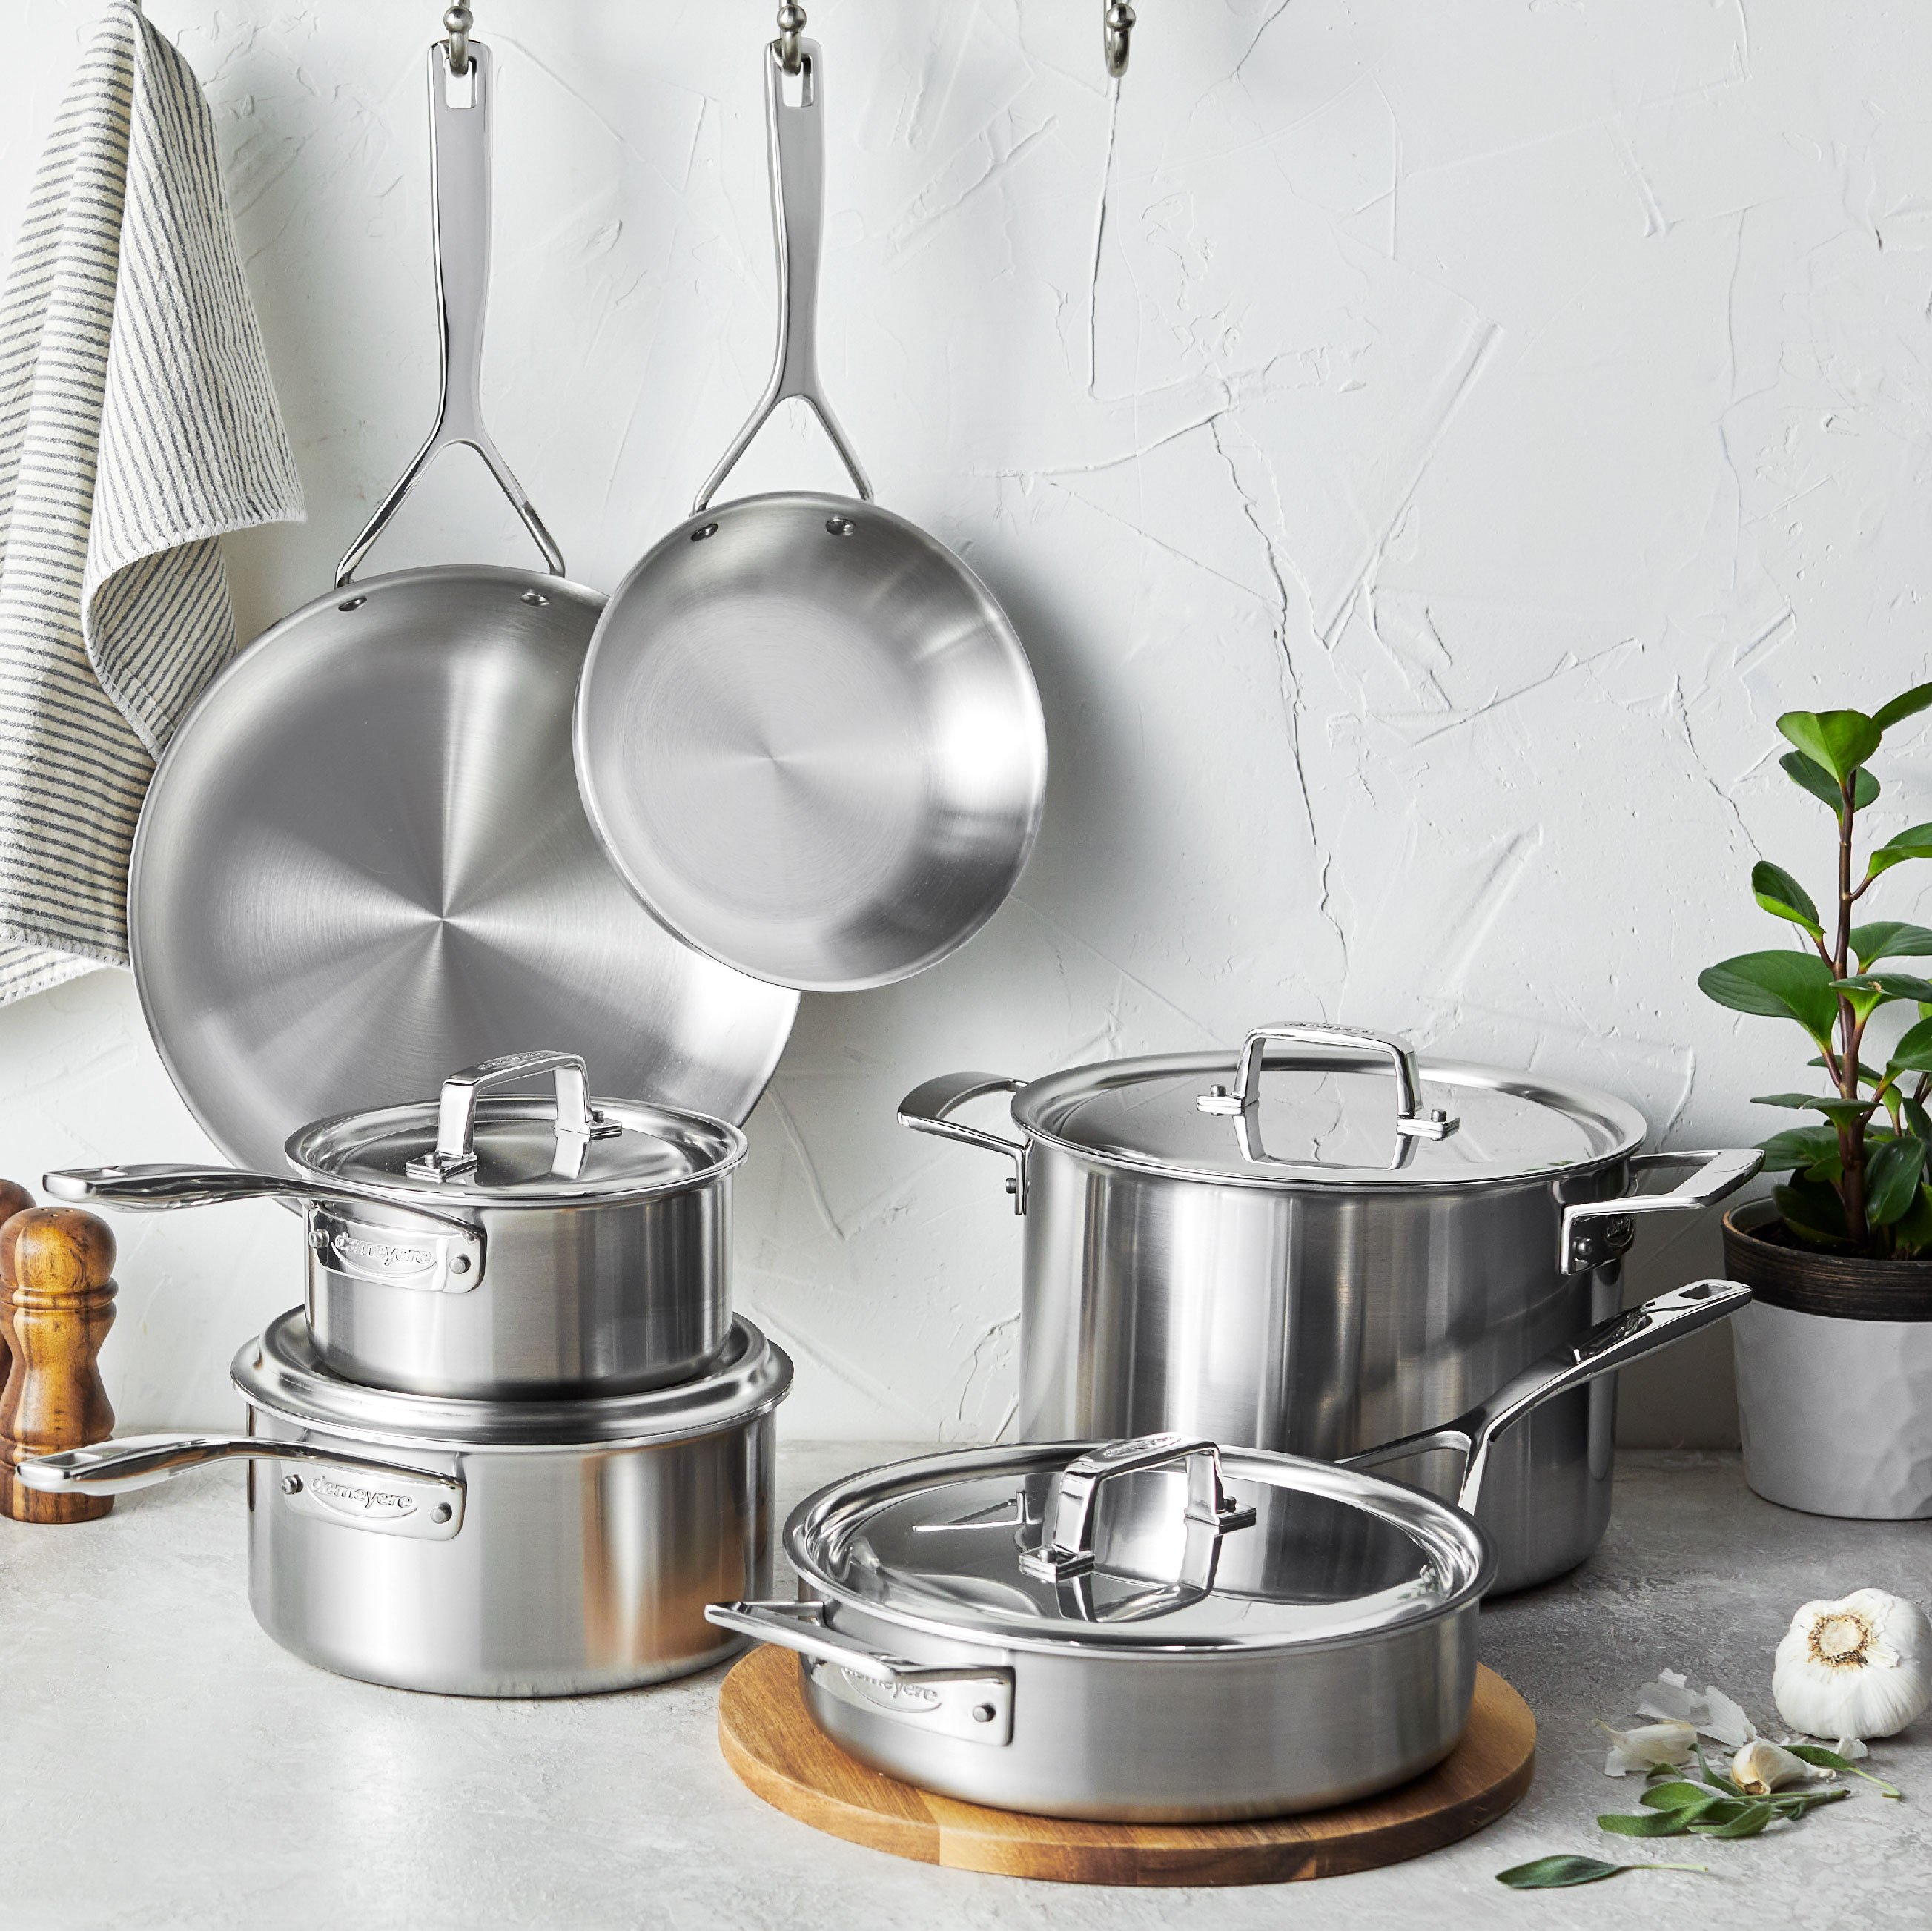 https://www.zwilling.com/on/demandware.static/-/Sites-zwilling-us-Library/default/dwd0d15b66/images/product-content/masonry-content/demeyere/cookware/essential-5/DE_Essentail_Masonry-05.jpg